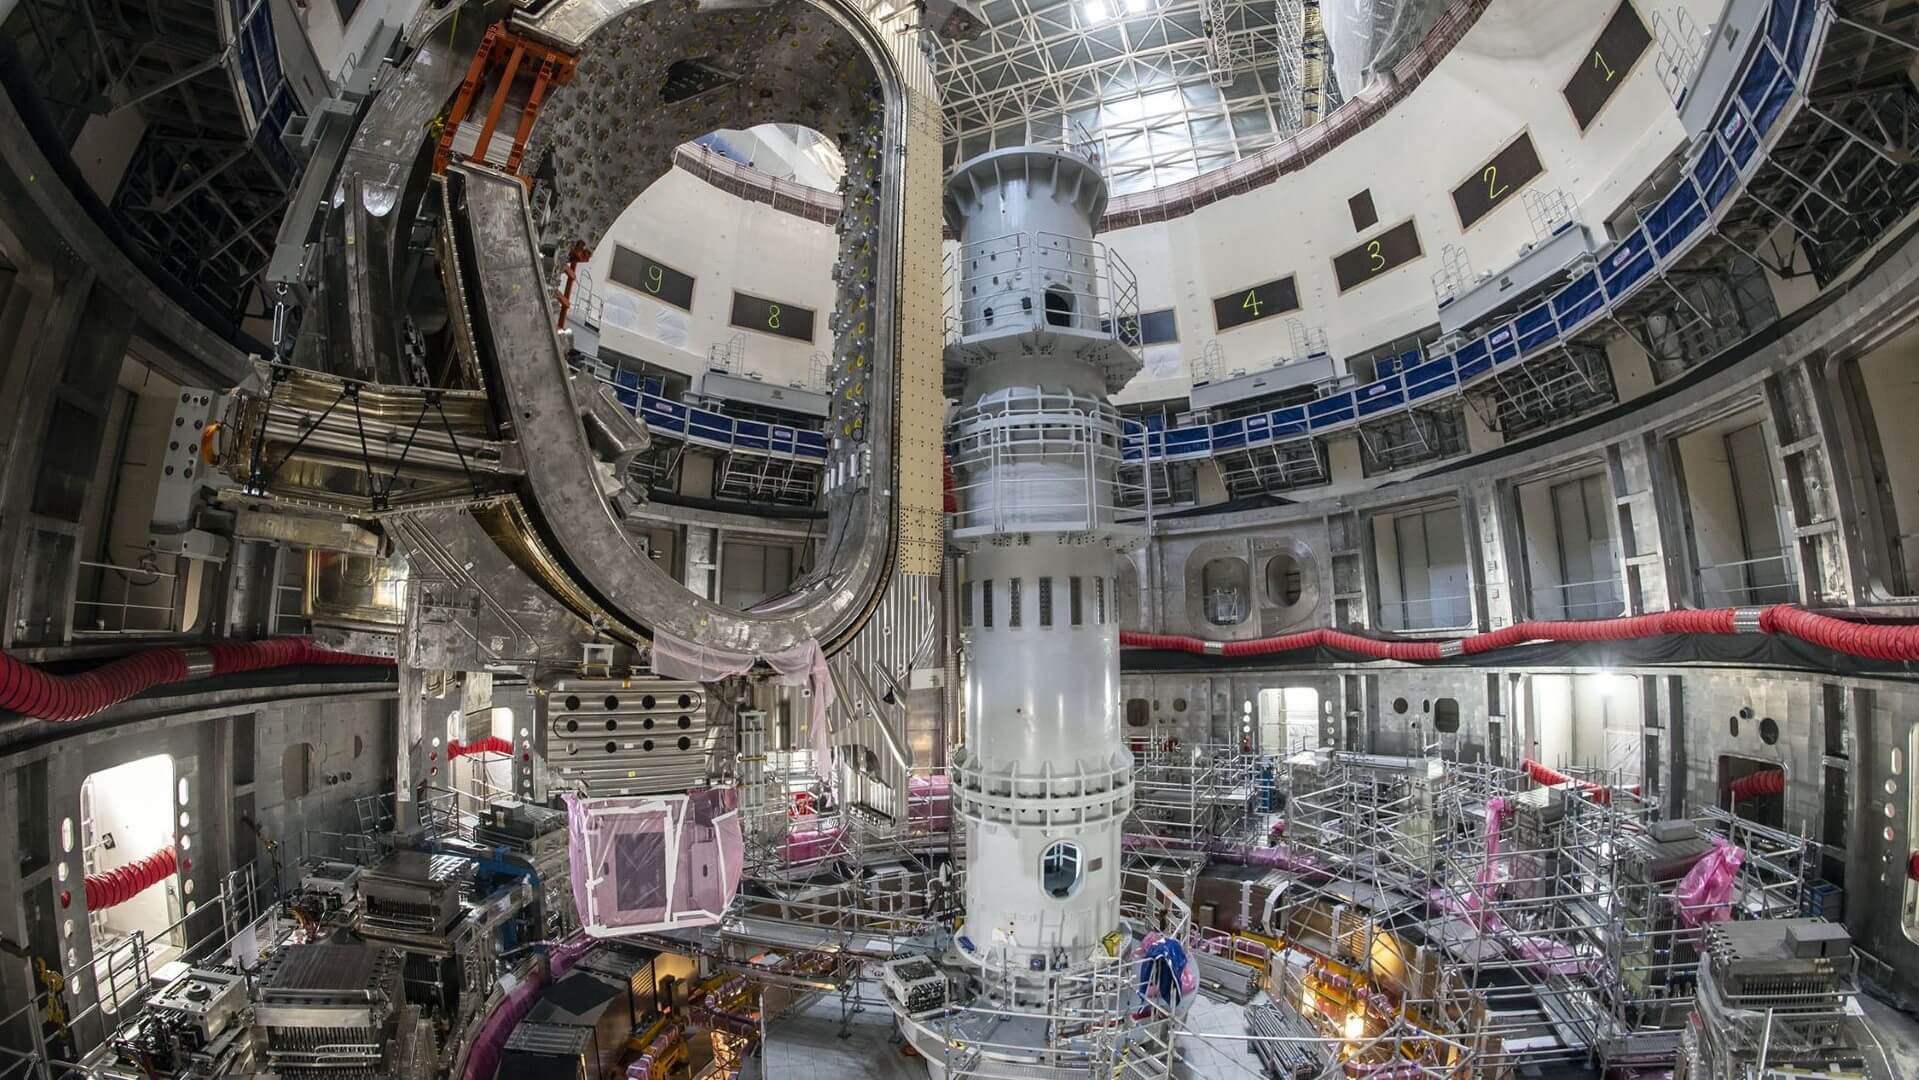 The first sub-section of the ITER plasma chamber